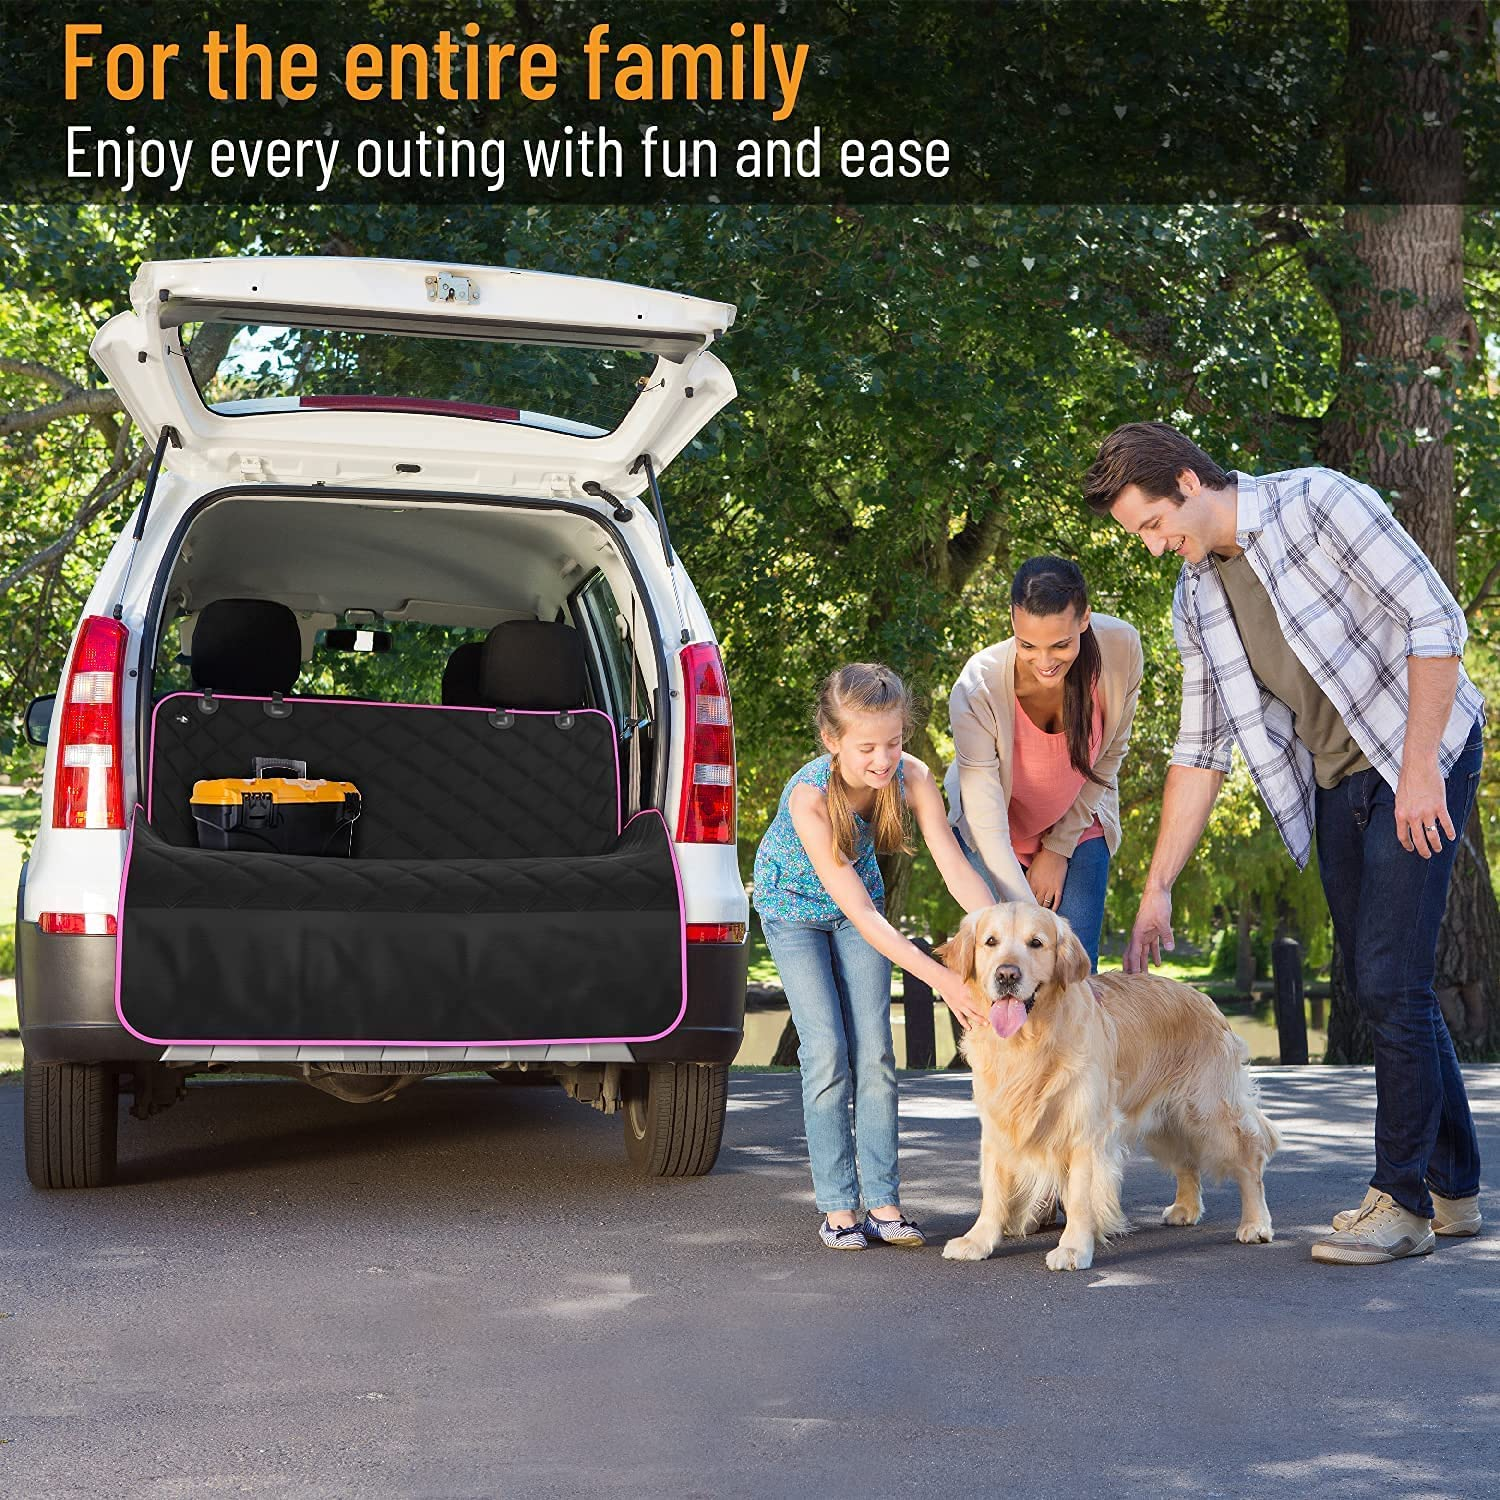 SUV Cargo Liner, Durable Non Slip Dog Seat Cover, Dog Cargo Liner SUV Protects against Dirt & Fur, Pet Cargo Liner for SUV & Trucks, Large Size Trunk Cover for Dogs Universal Fit